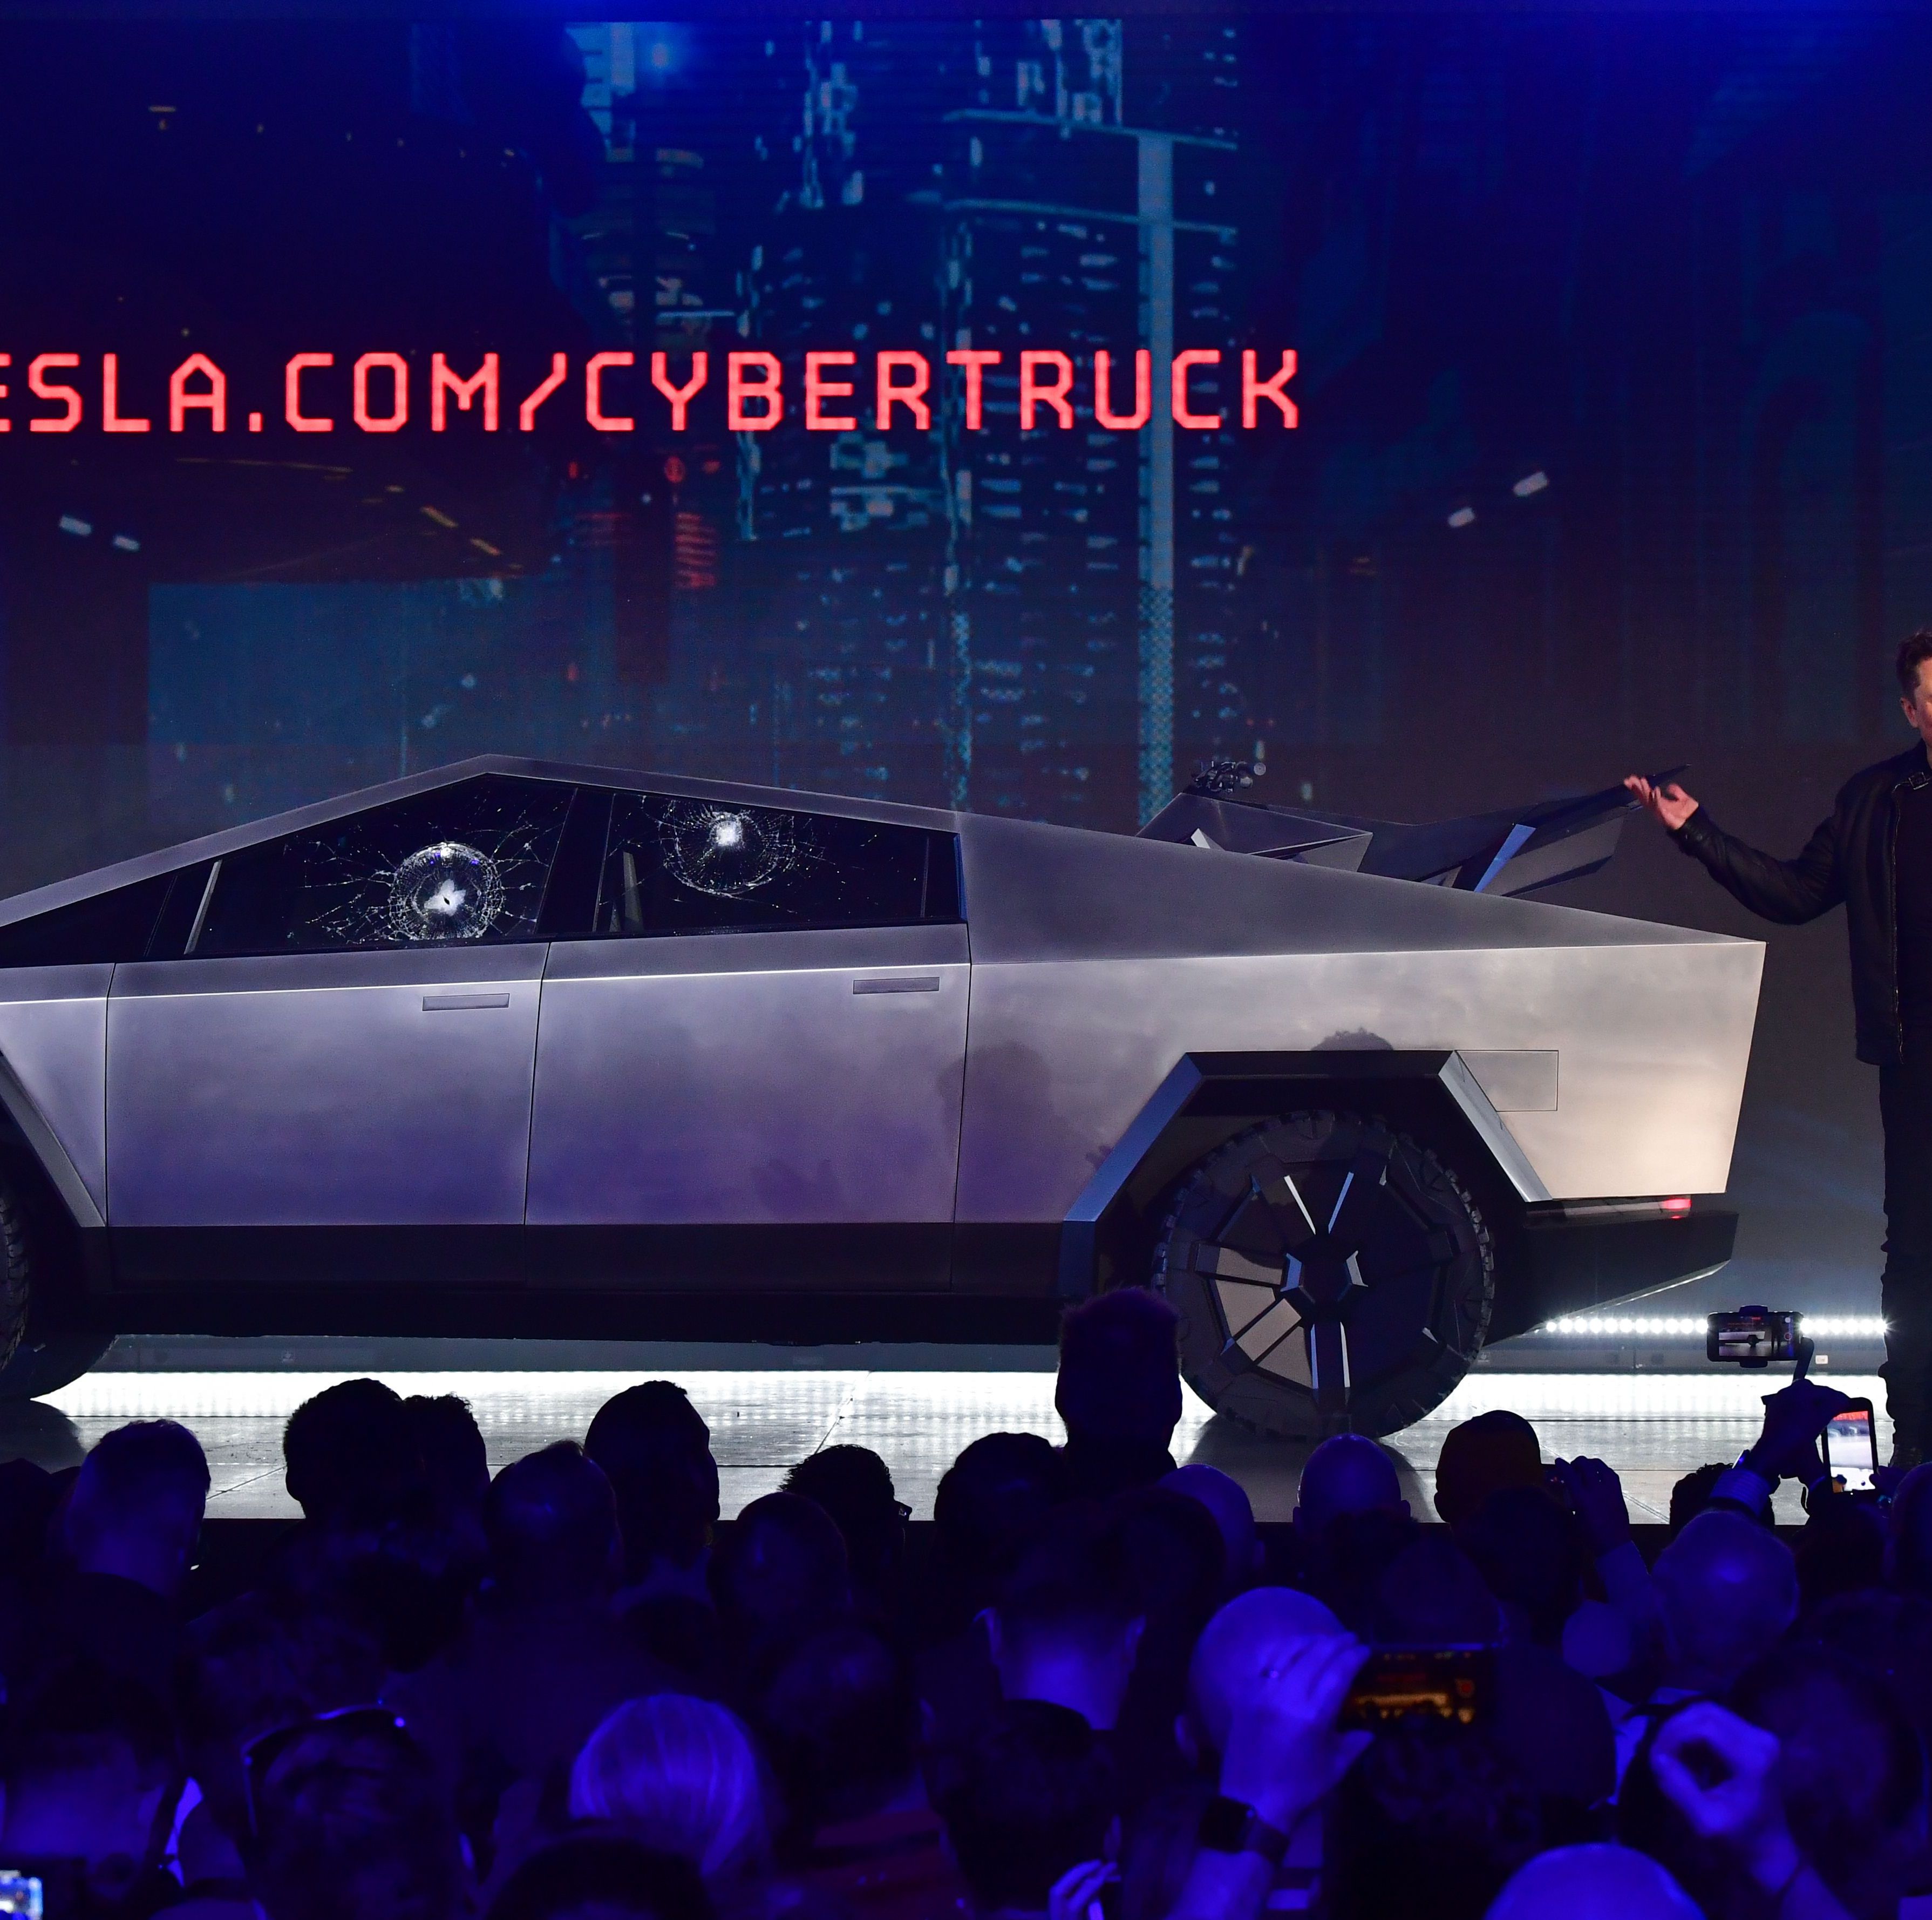 Cybertruck Could Be Nearing Production, but at What Price?